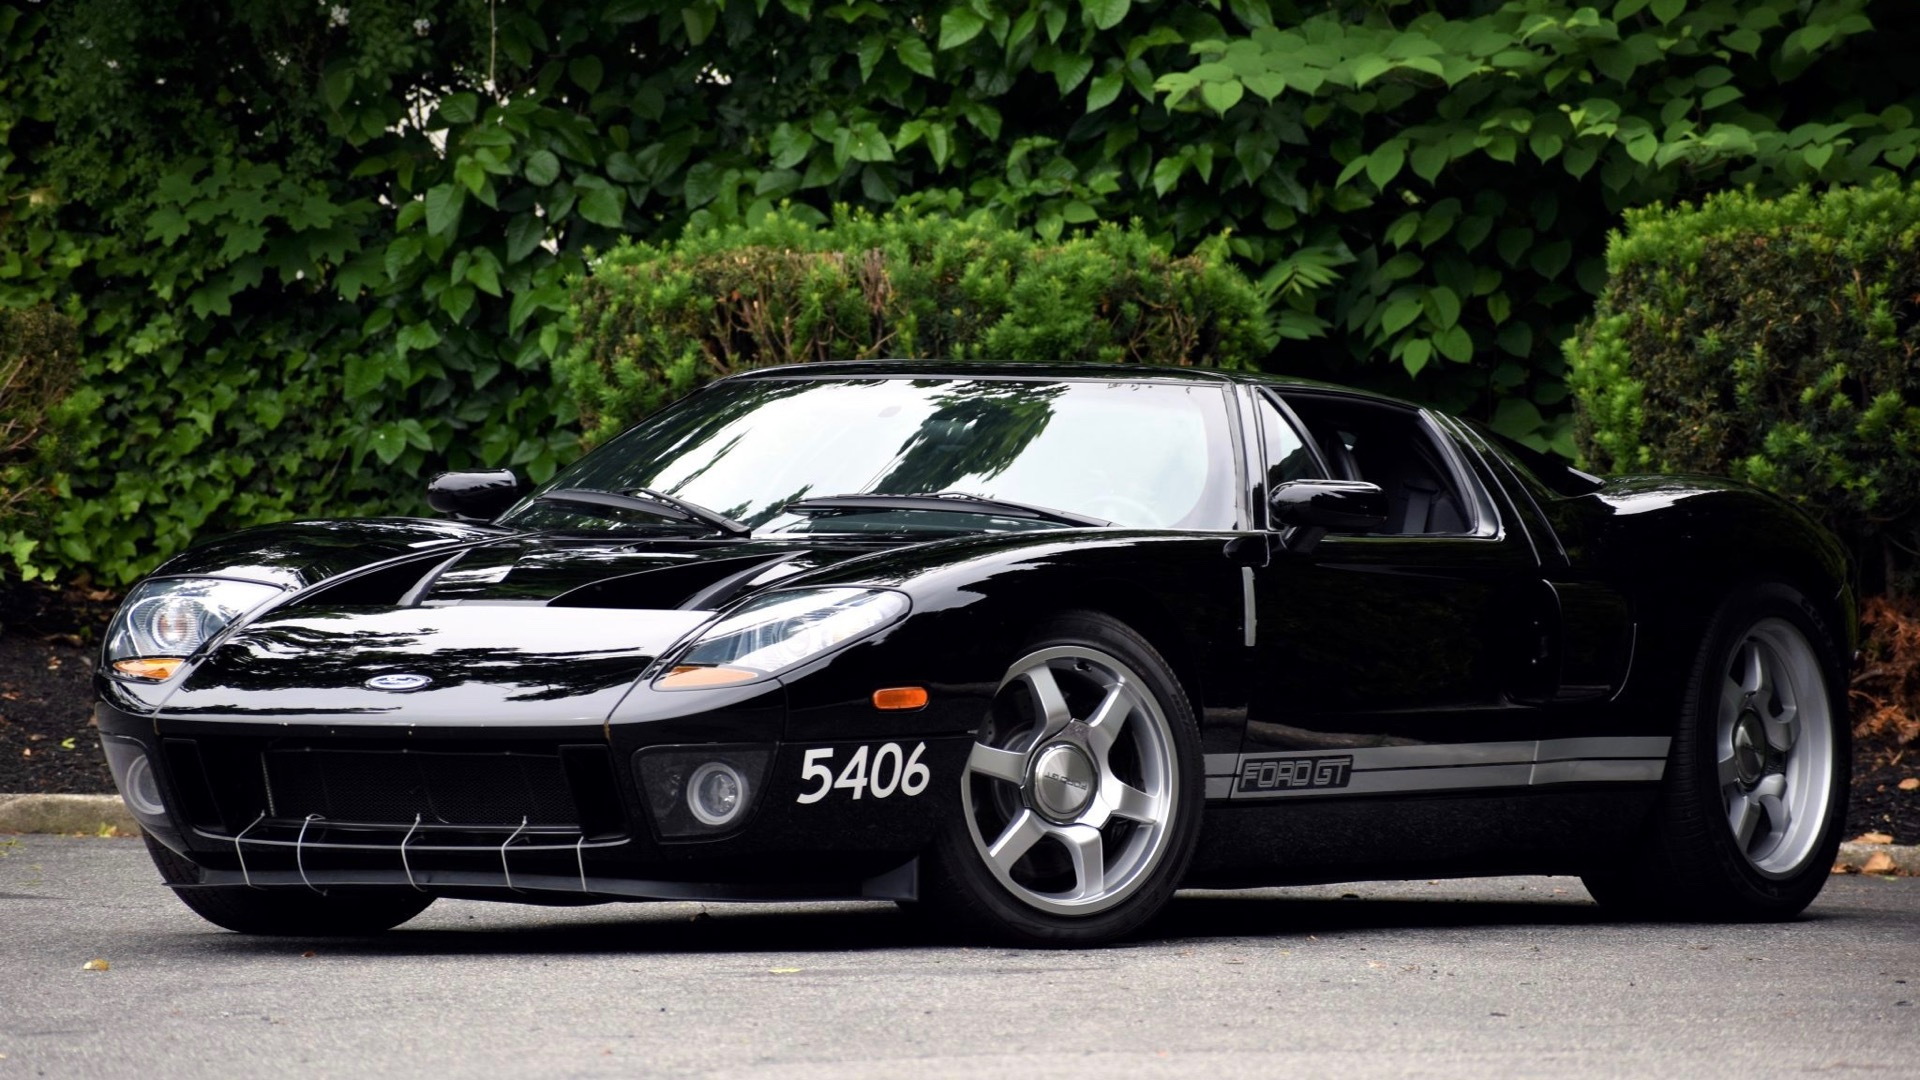 2004 Ford GT Confirmation Prototype 1 (Photo by Bring a Trailer)